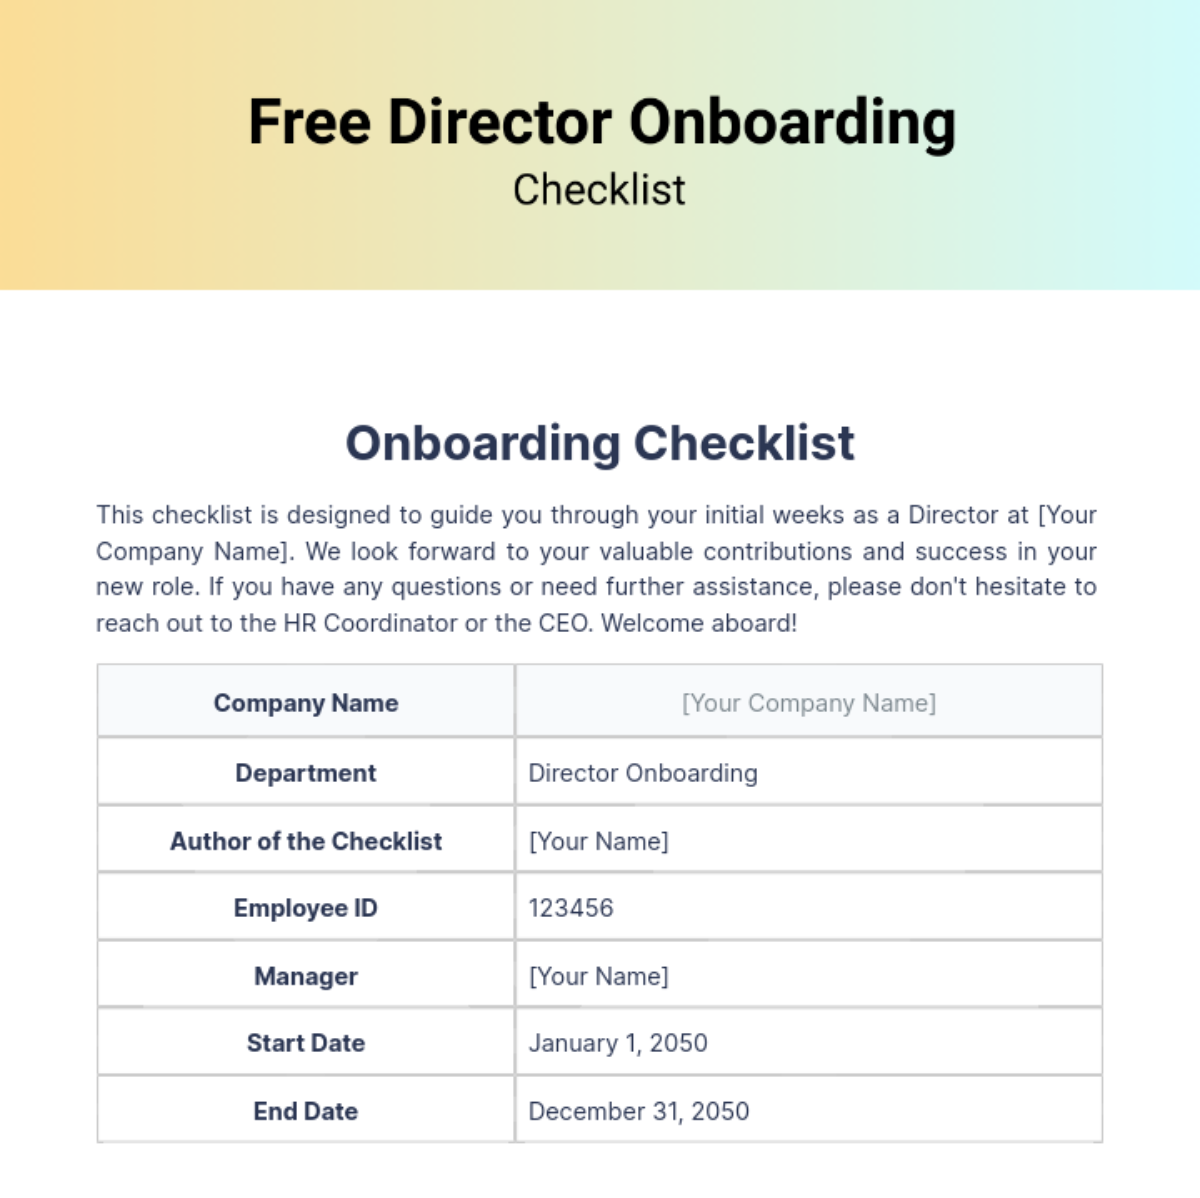 Free Director Onboarding Checklist Template